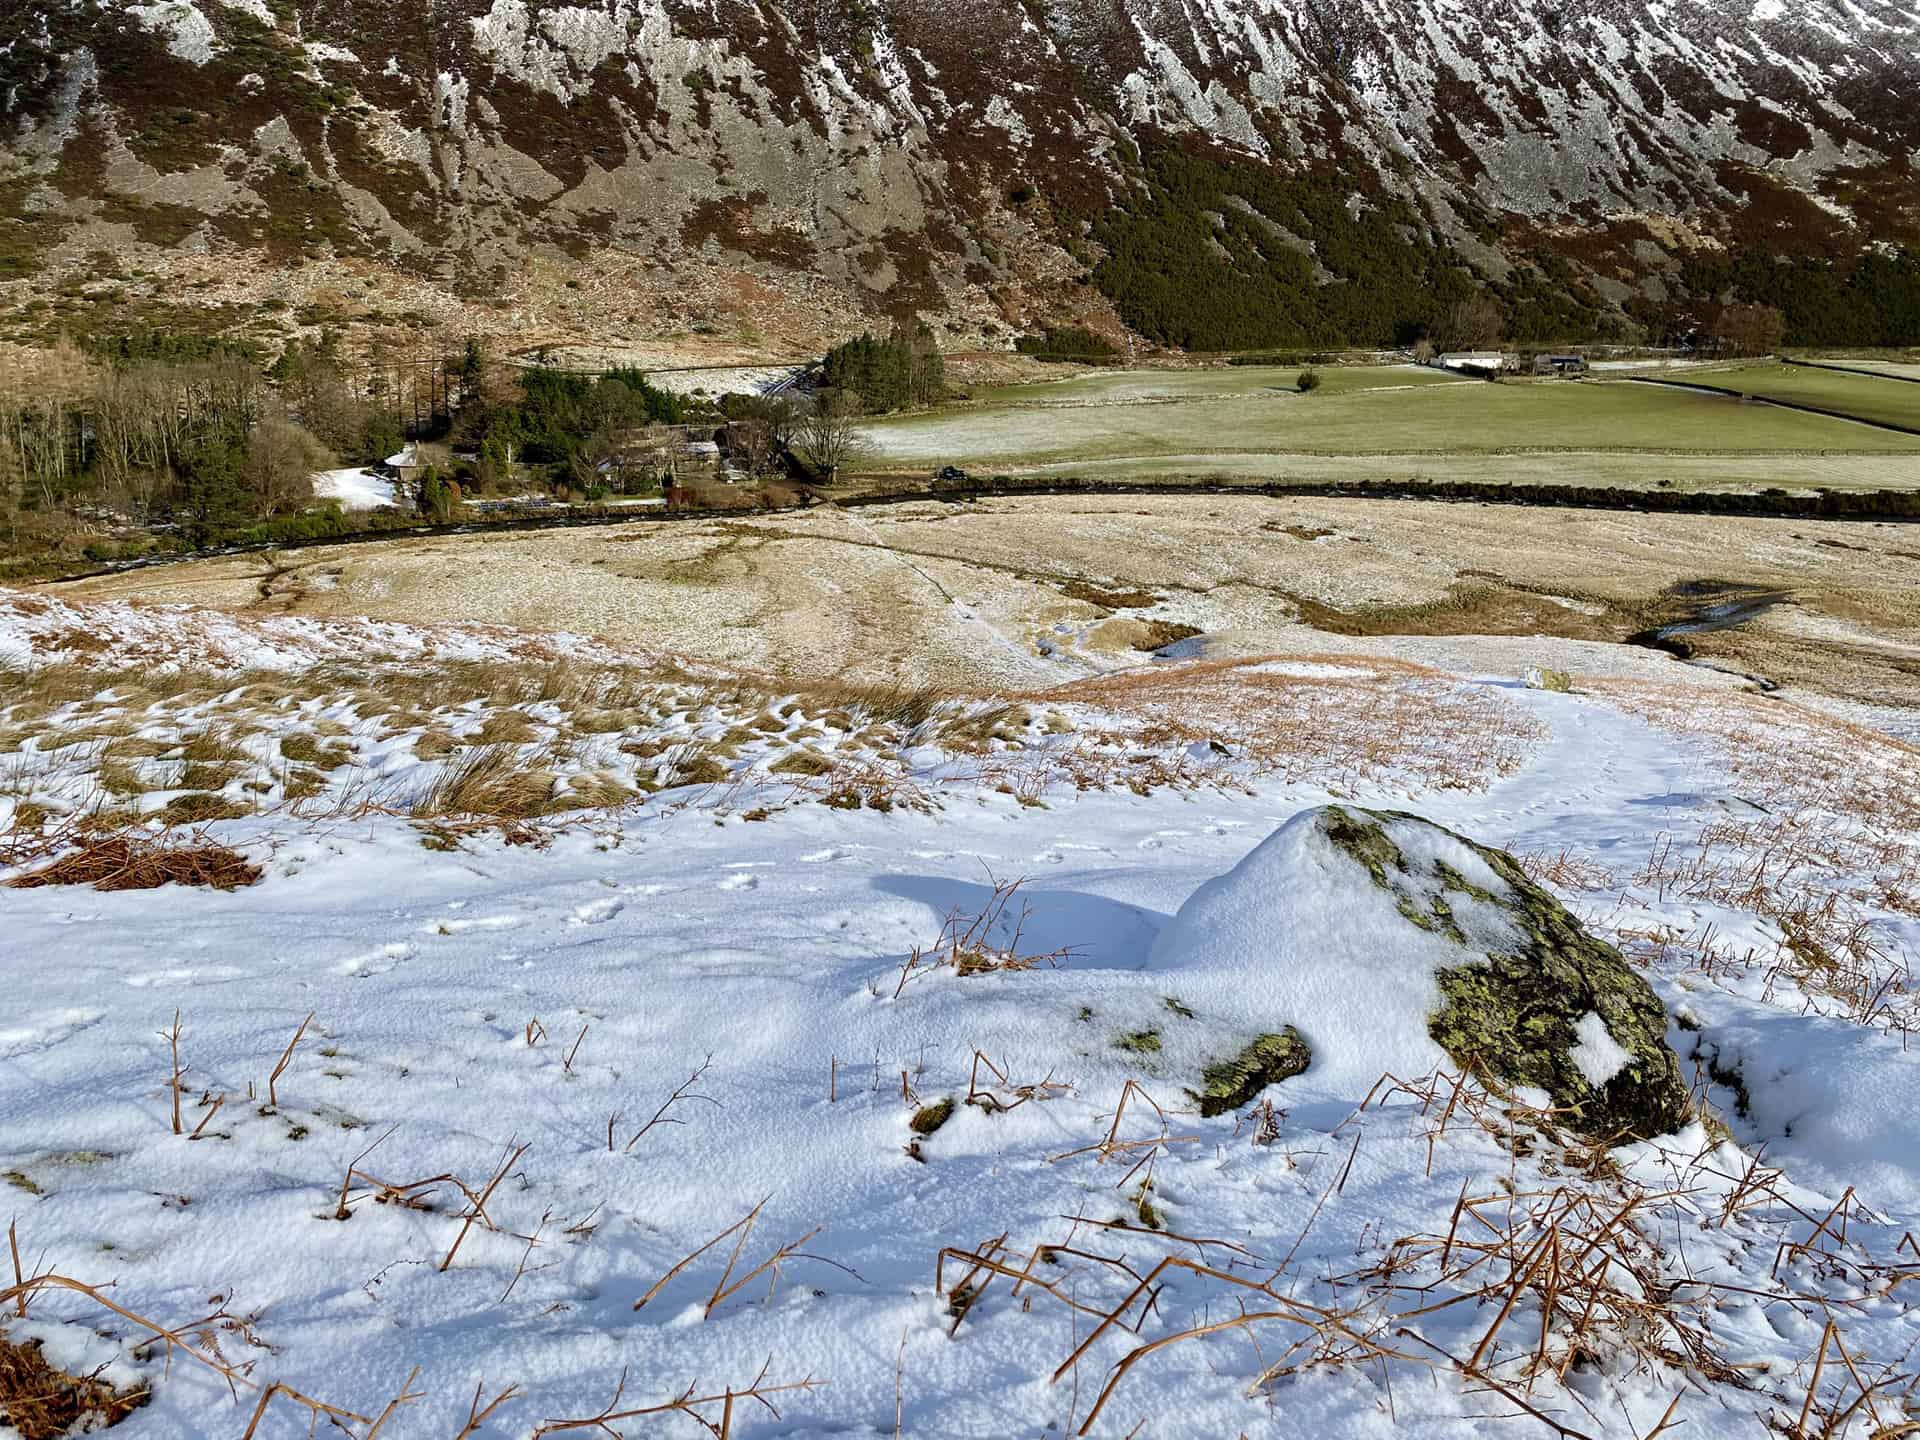 The snow-covered route down to Roundhouse, below the steep slopes of Carrock Fell.